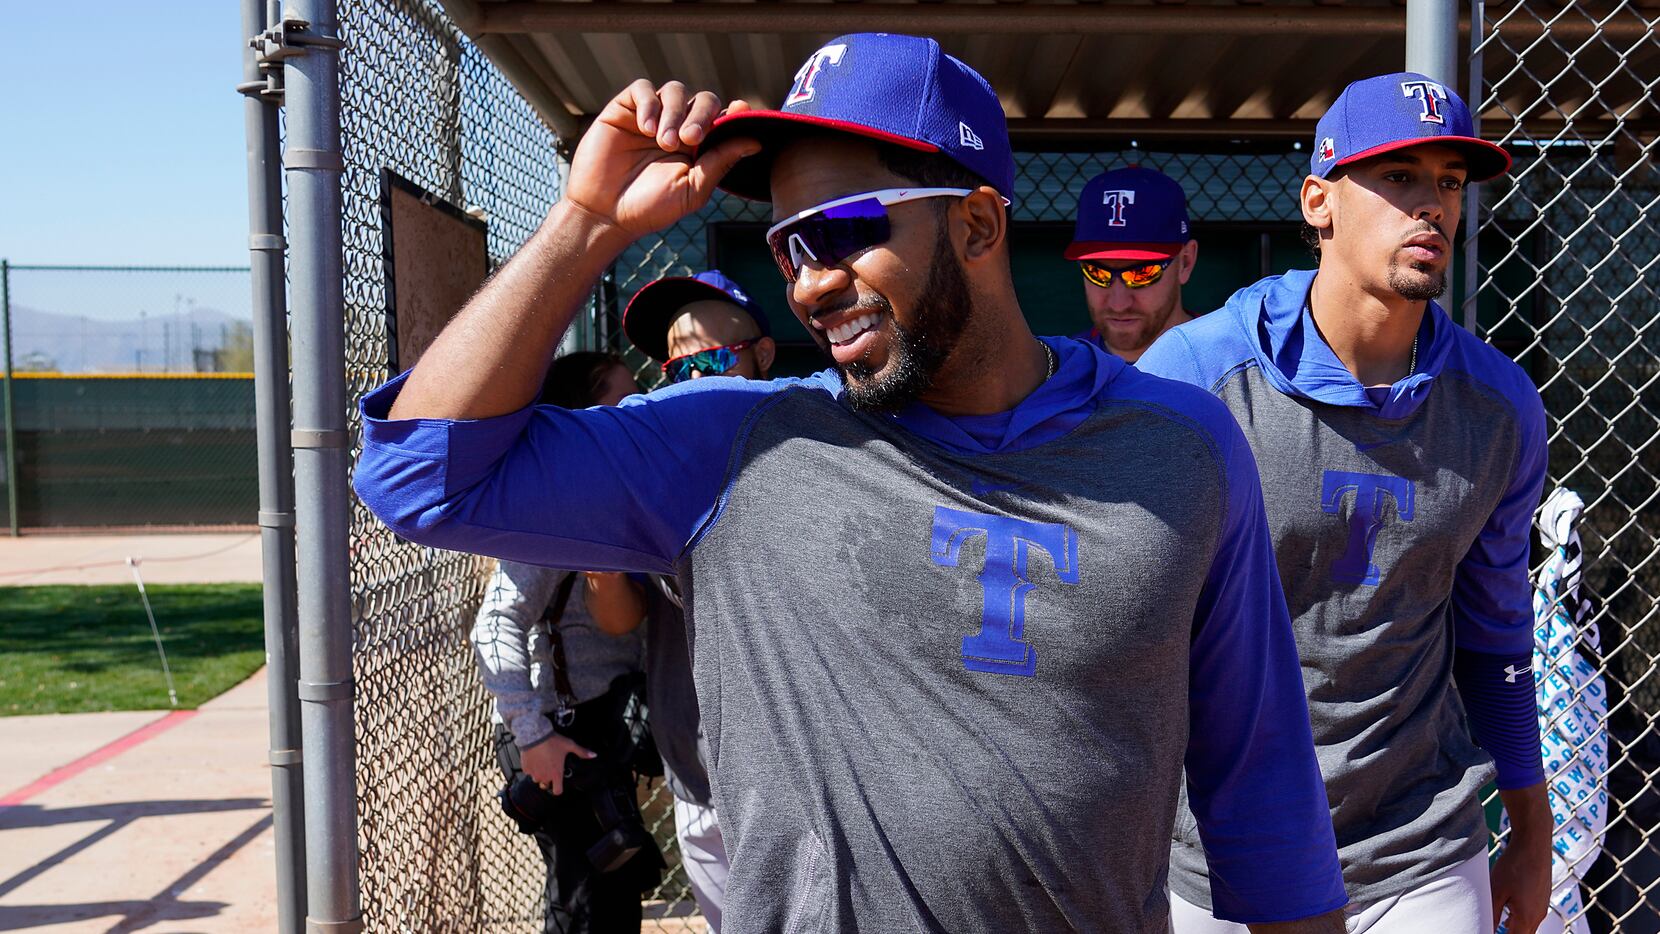 Texas Rangers shortstop Elvis Andrus tips his cap as he walks from a dugout on to a practice...